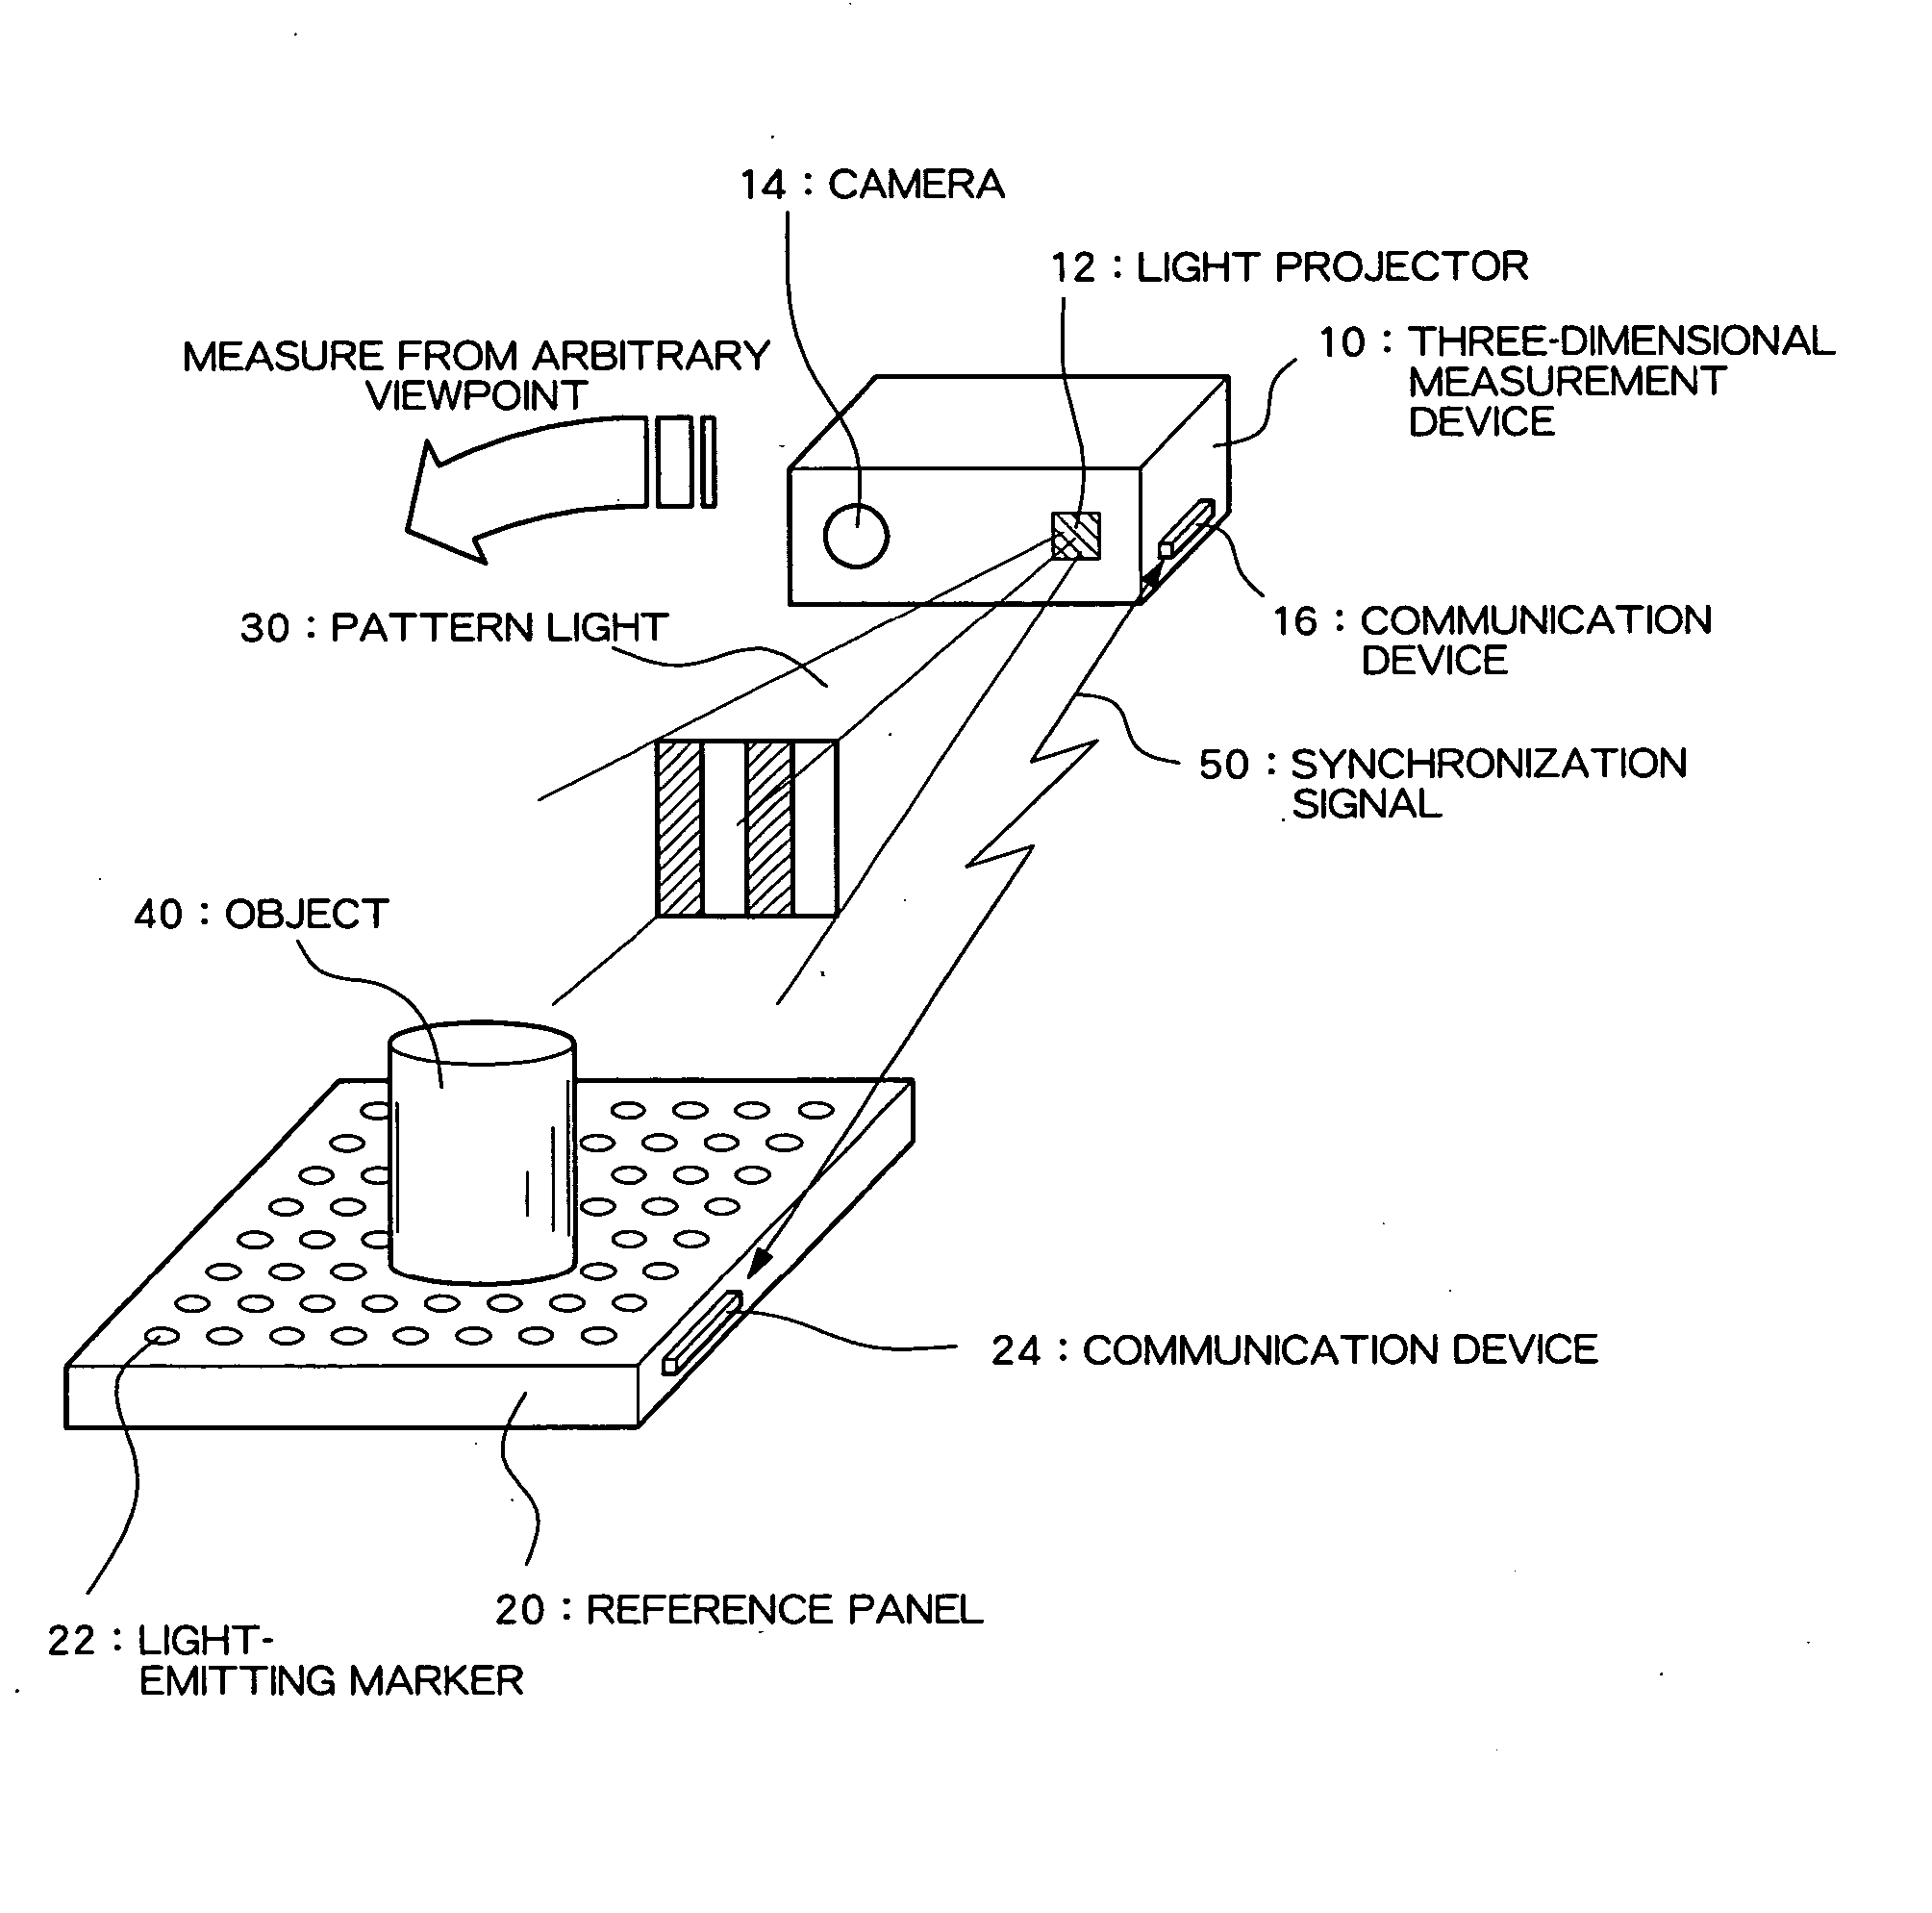 Camera Calibration System and Three-Dimensional Measuring System